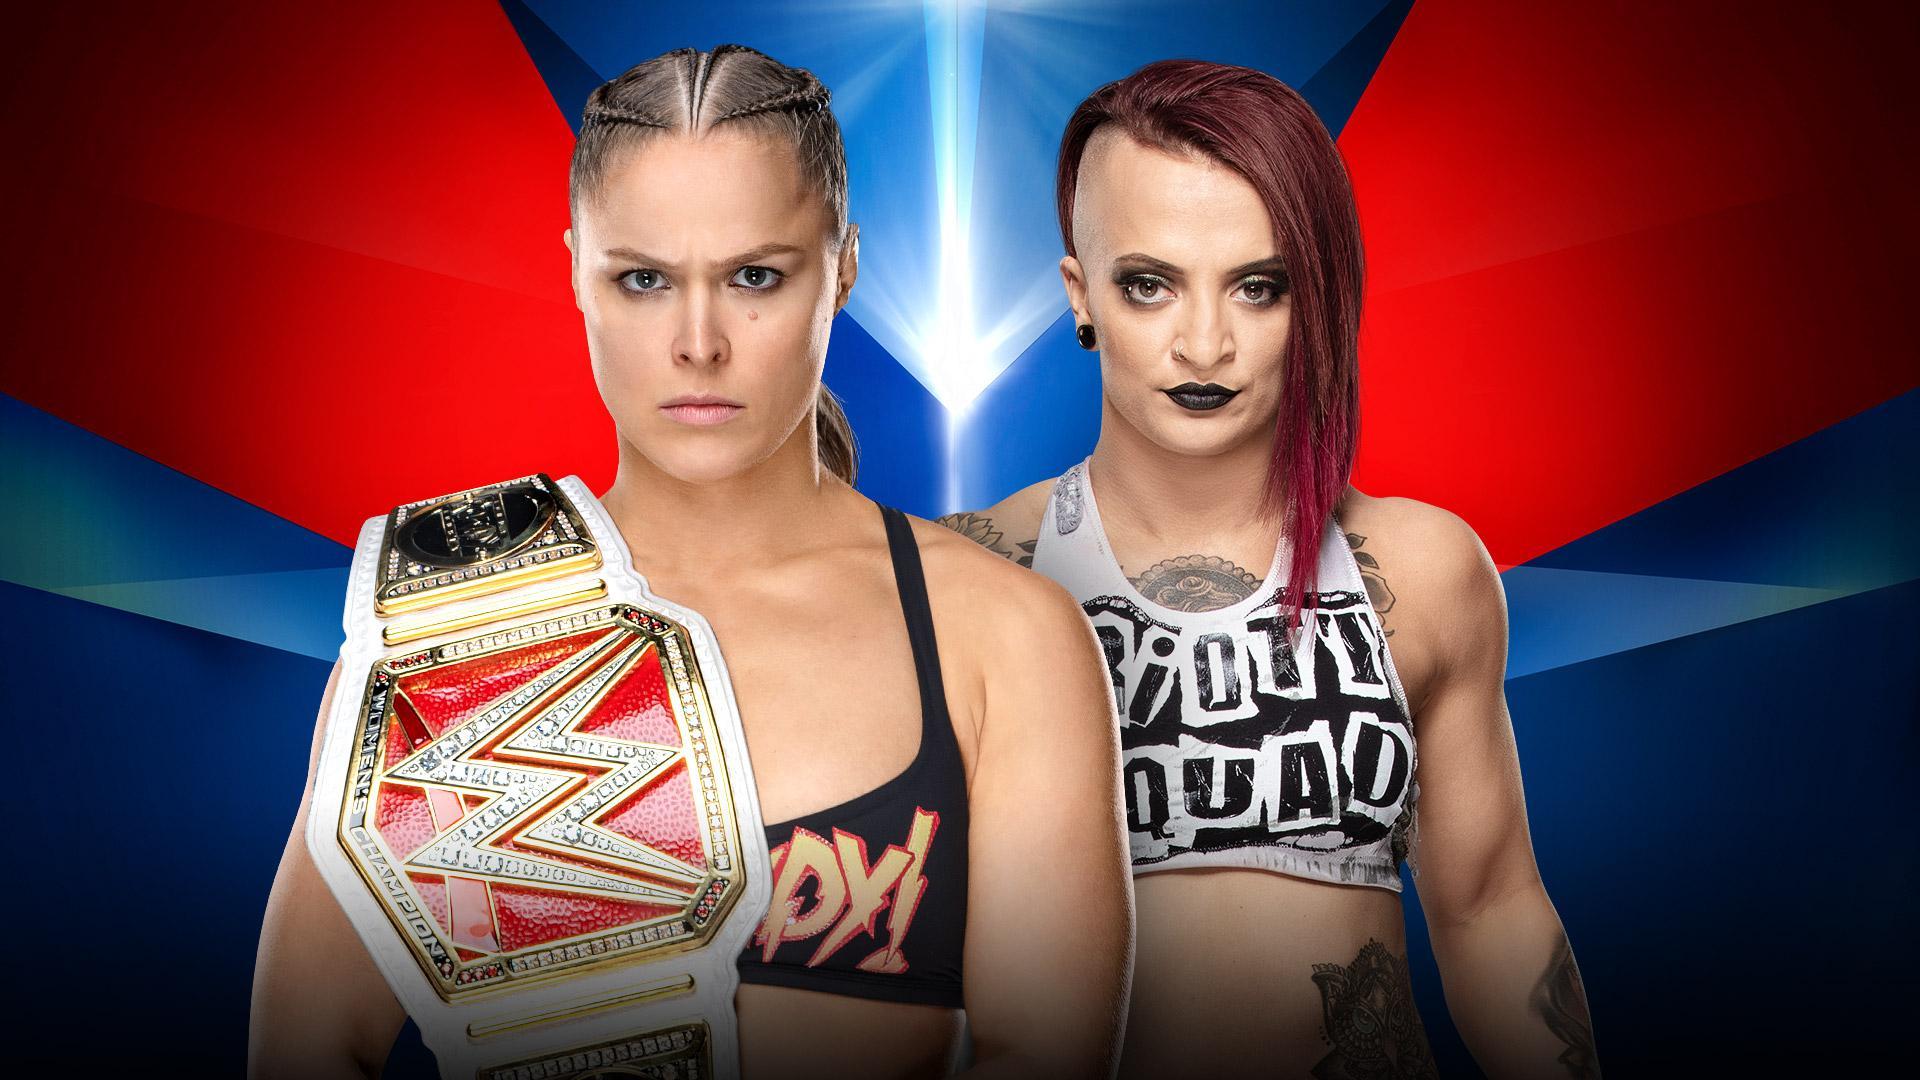 Ronda Rousey vs. Ruby Riott official for WWE Elimination Chamber